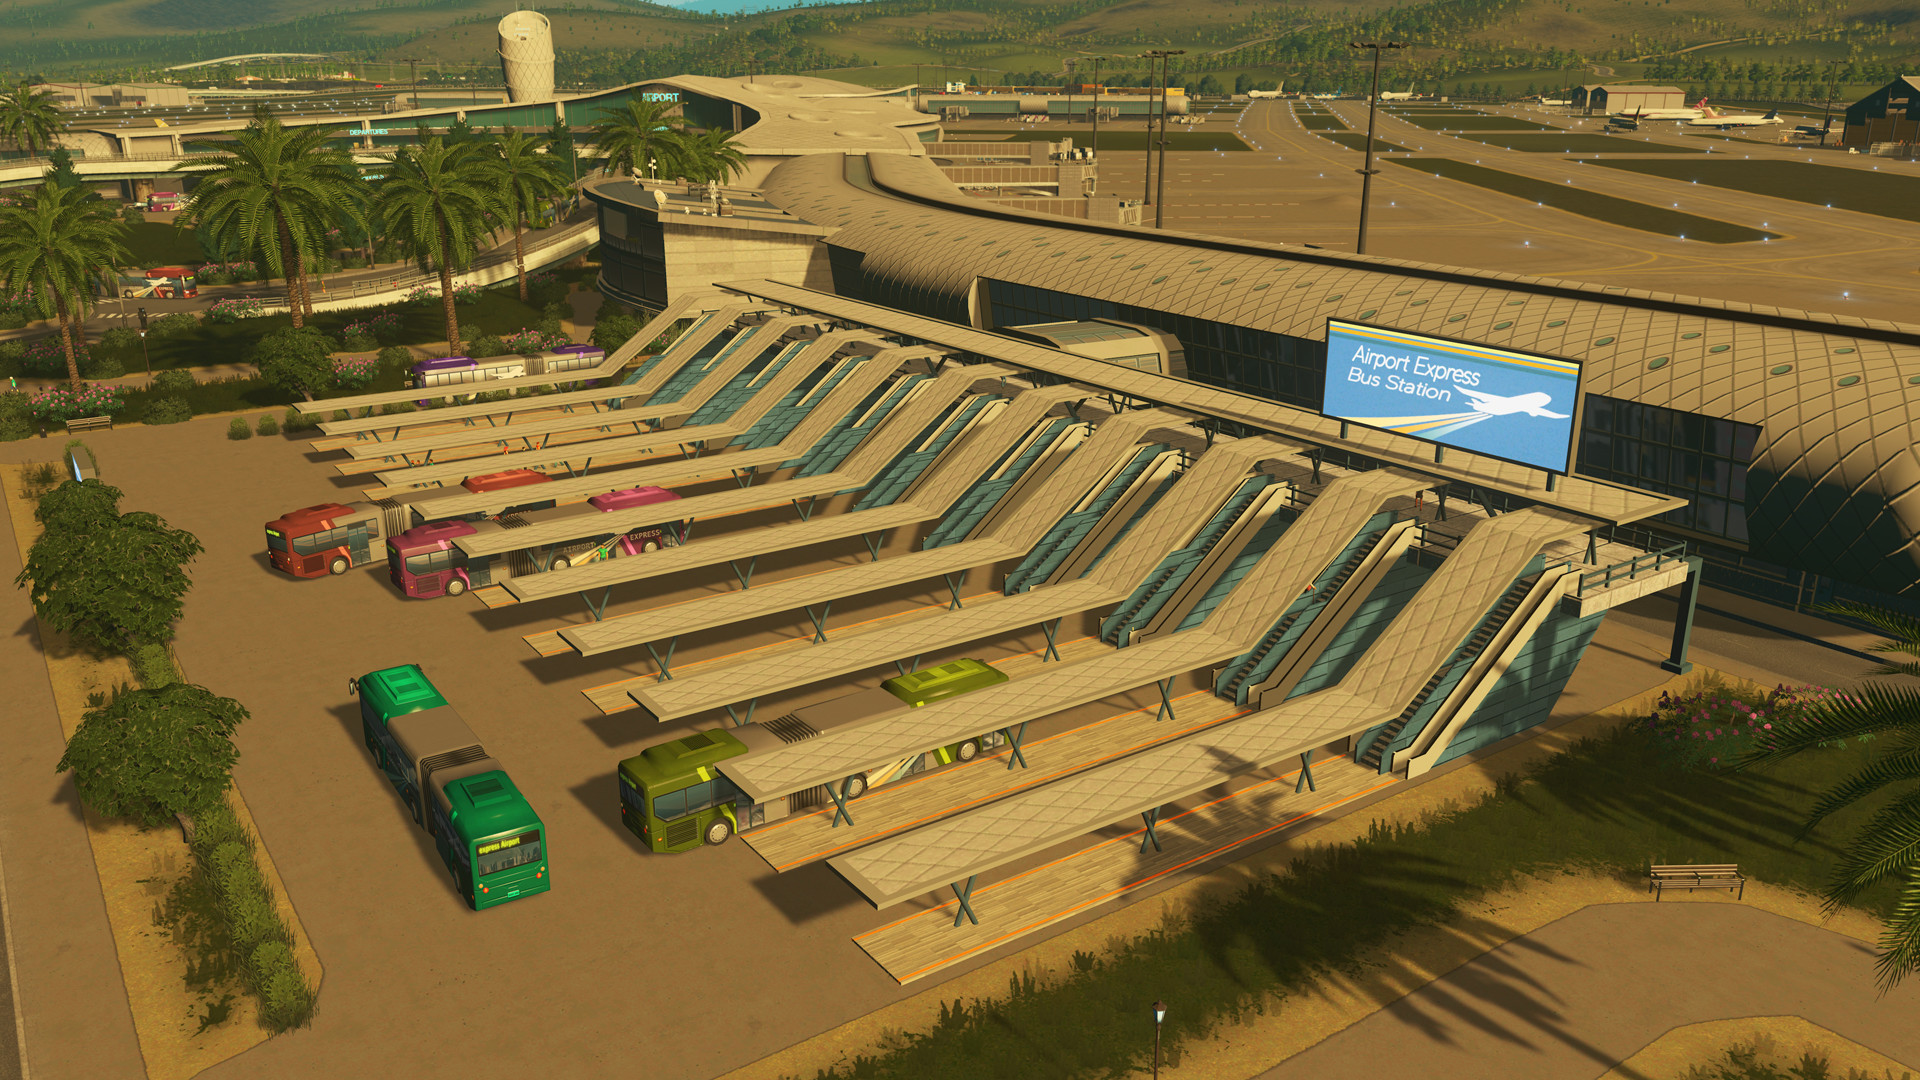 Cities Skylines Airports Screenshot Showing Bus Terminal Integration into the Airport